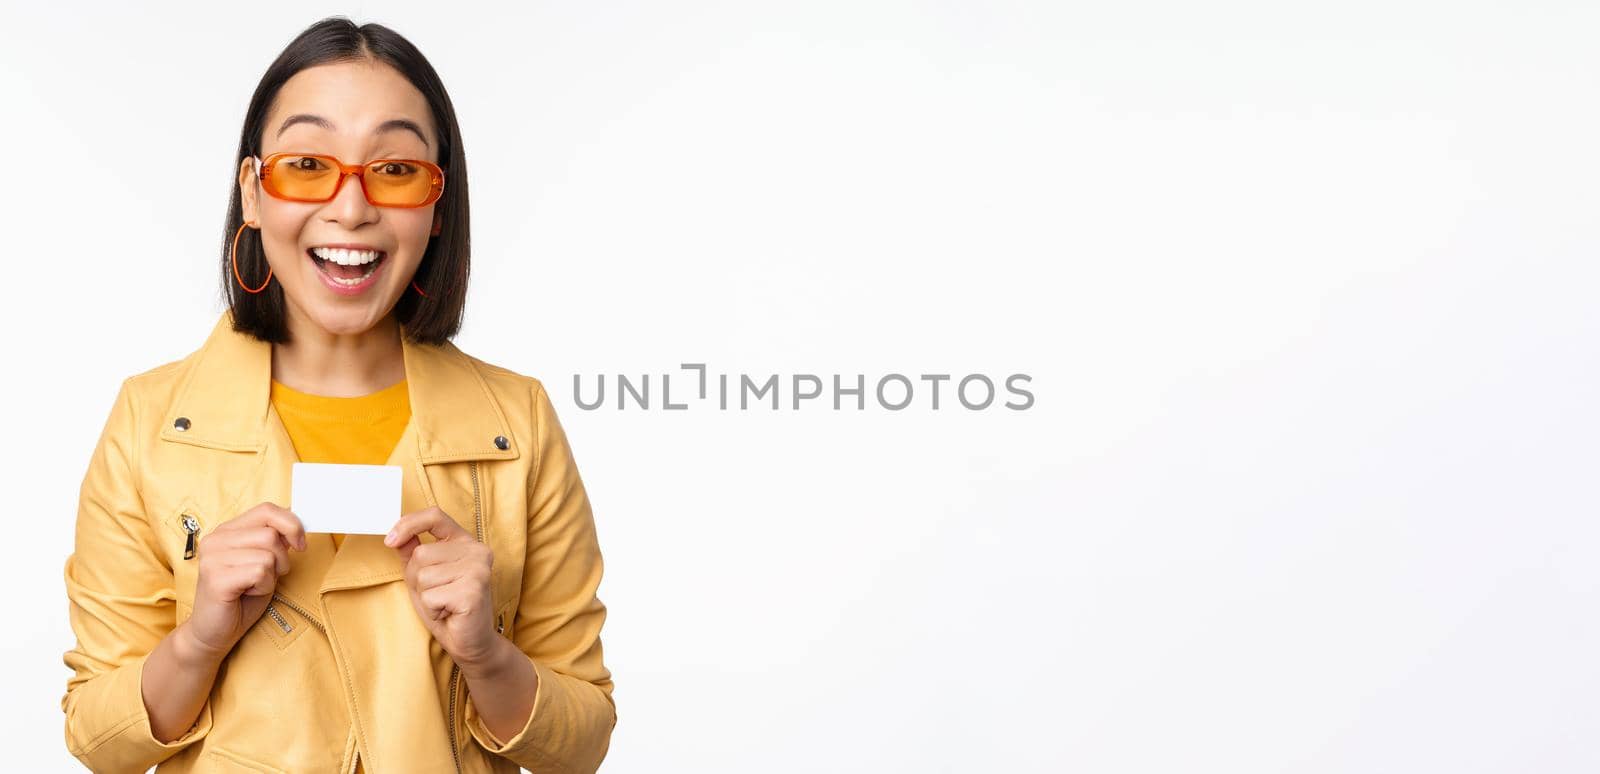 Portrait of beautiful modern asian girl in sunglasses, smiling happy, showing credit card, standing over white background. copy space